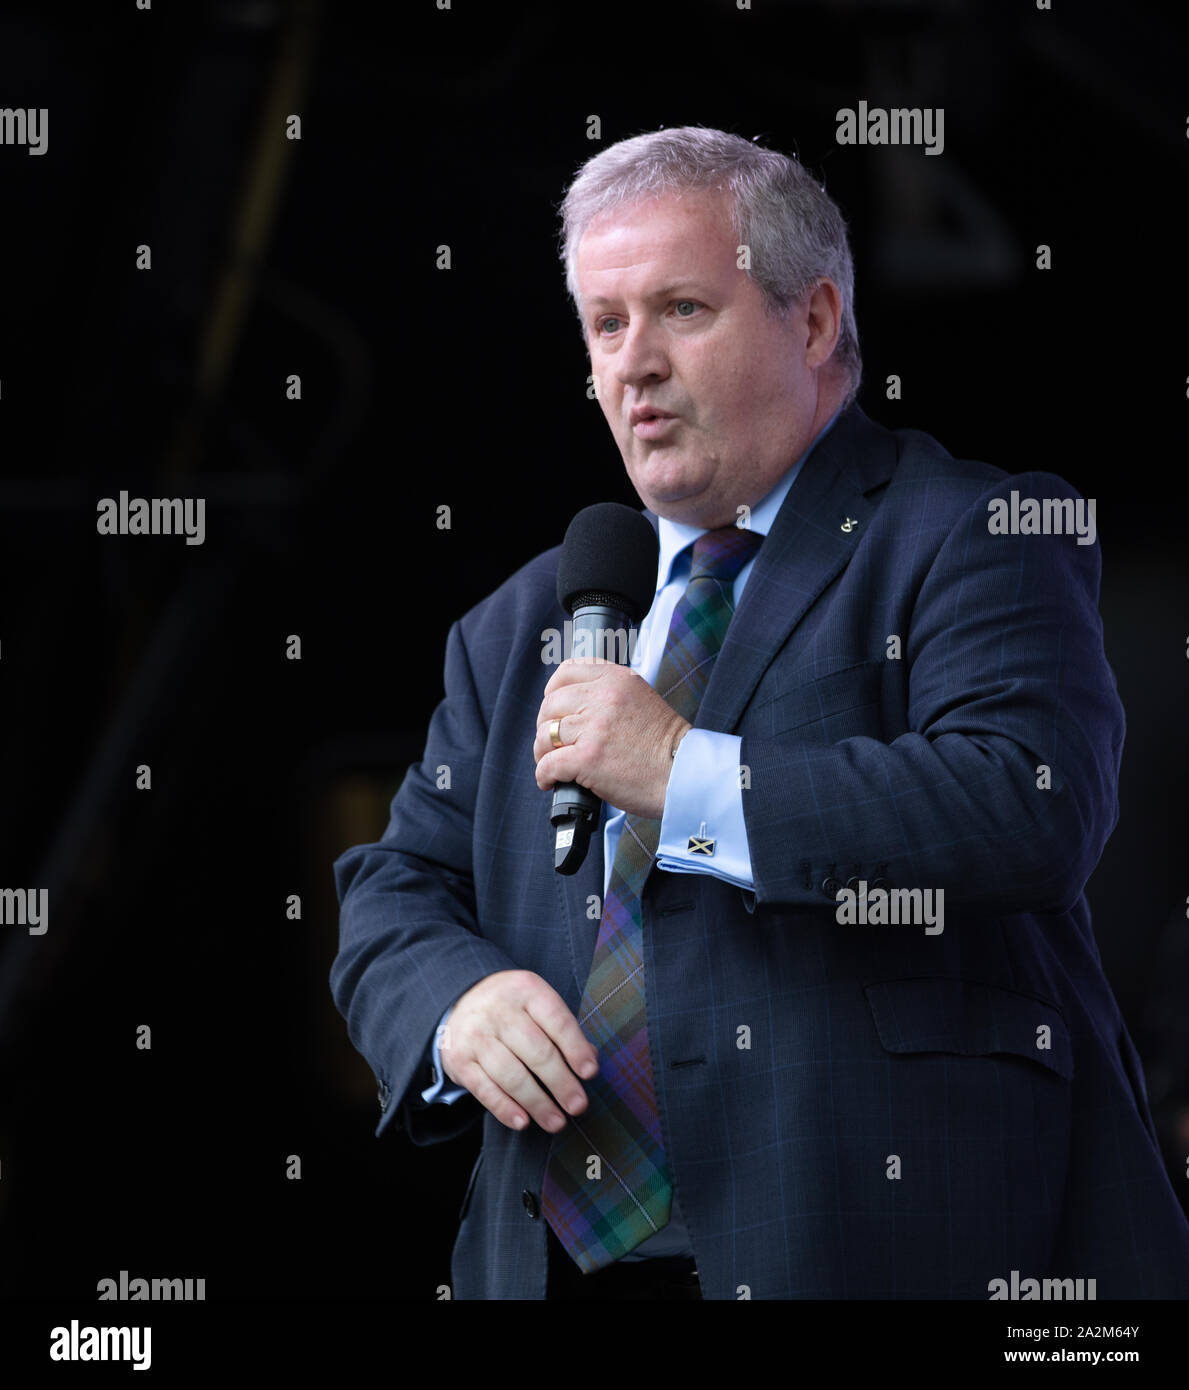 London, UK. 4th September 2019. Ian Blackford MP, British politician, leader of the Westminster SNP (Scottish National Party), at an anti-Brexit rally on Parliament Square, London. Credit: Joe Kuis / Alamy News and reportage Stock Photo